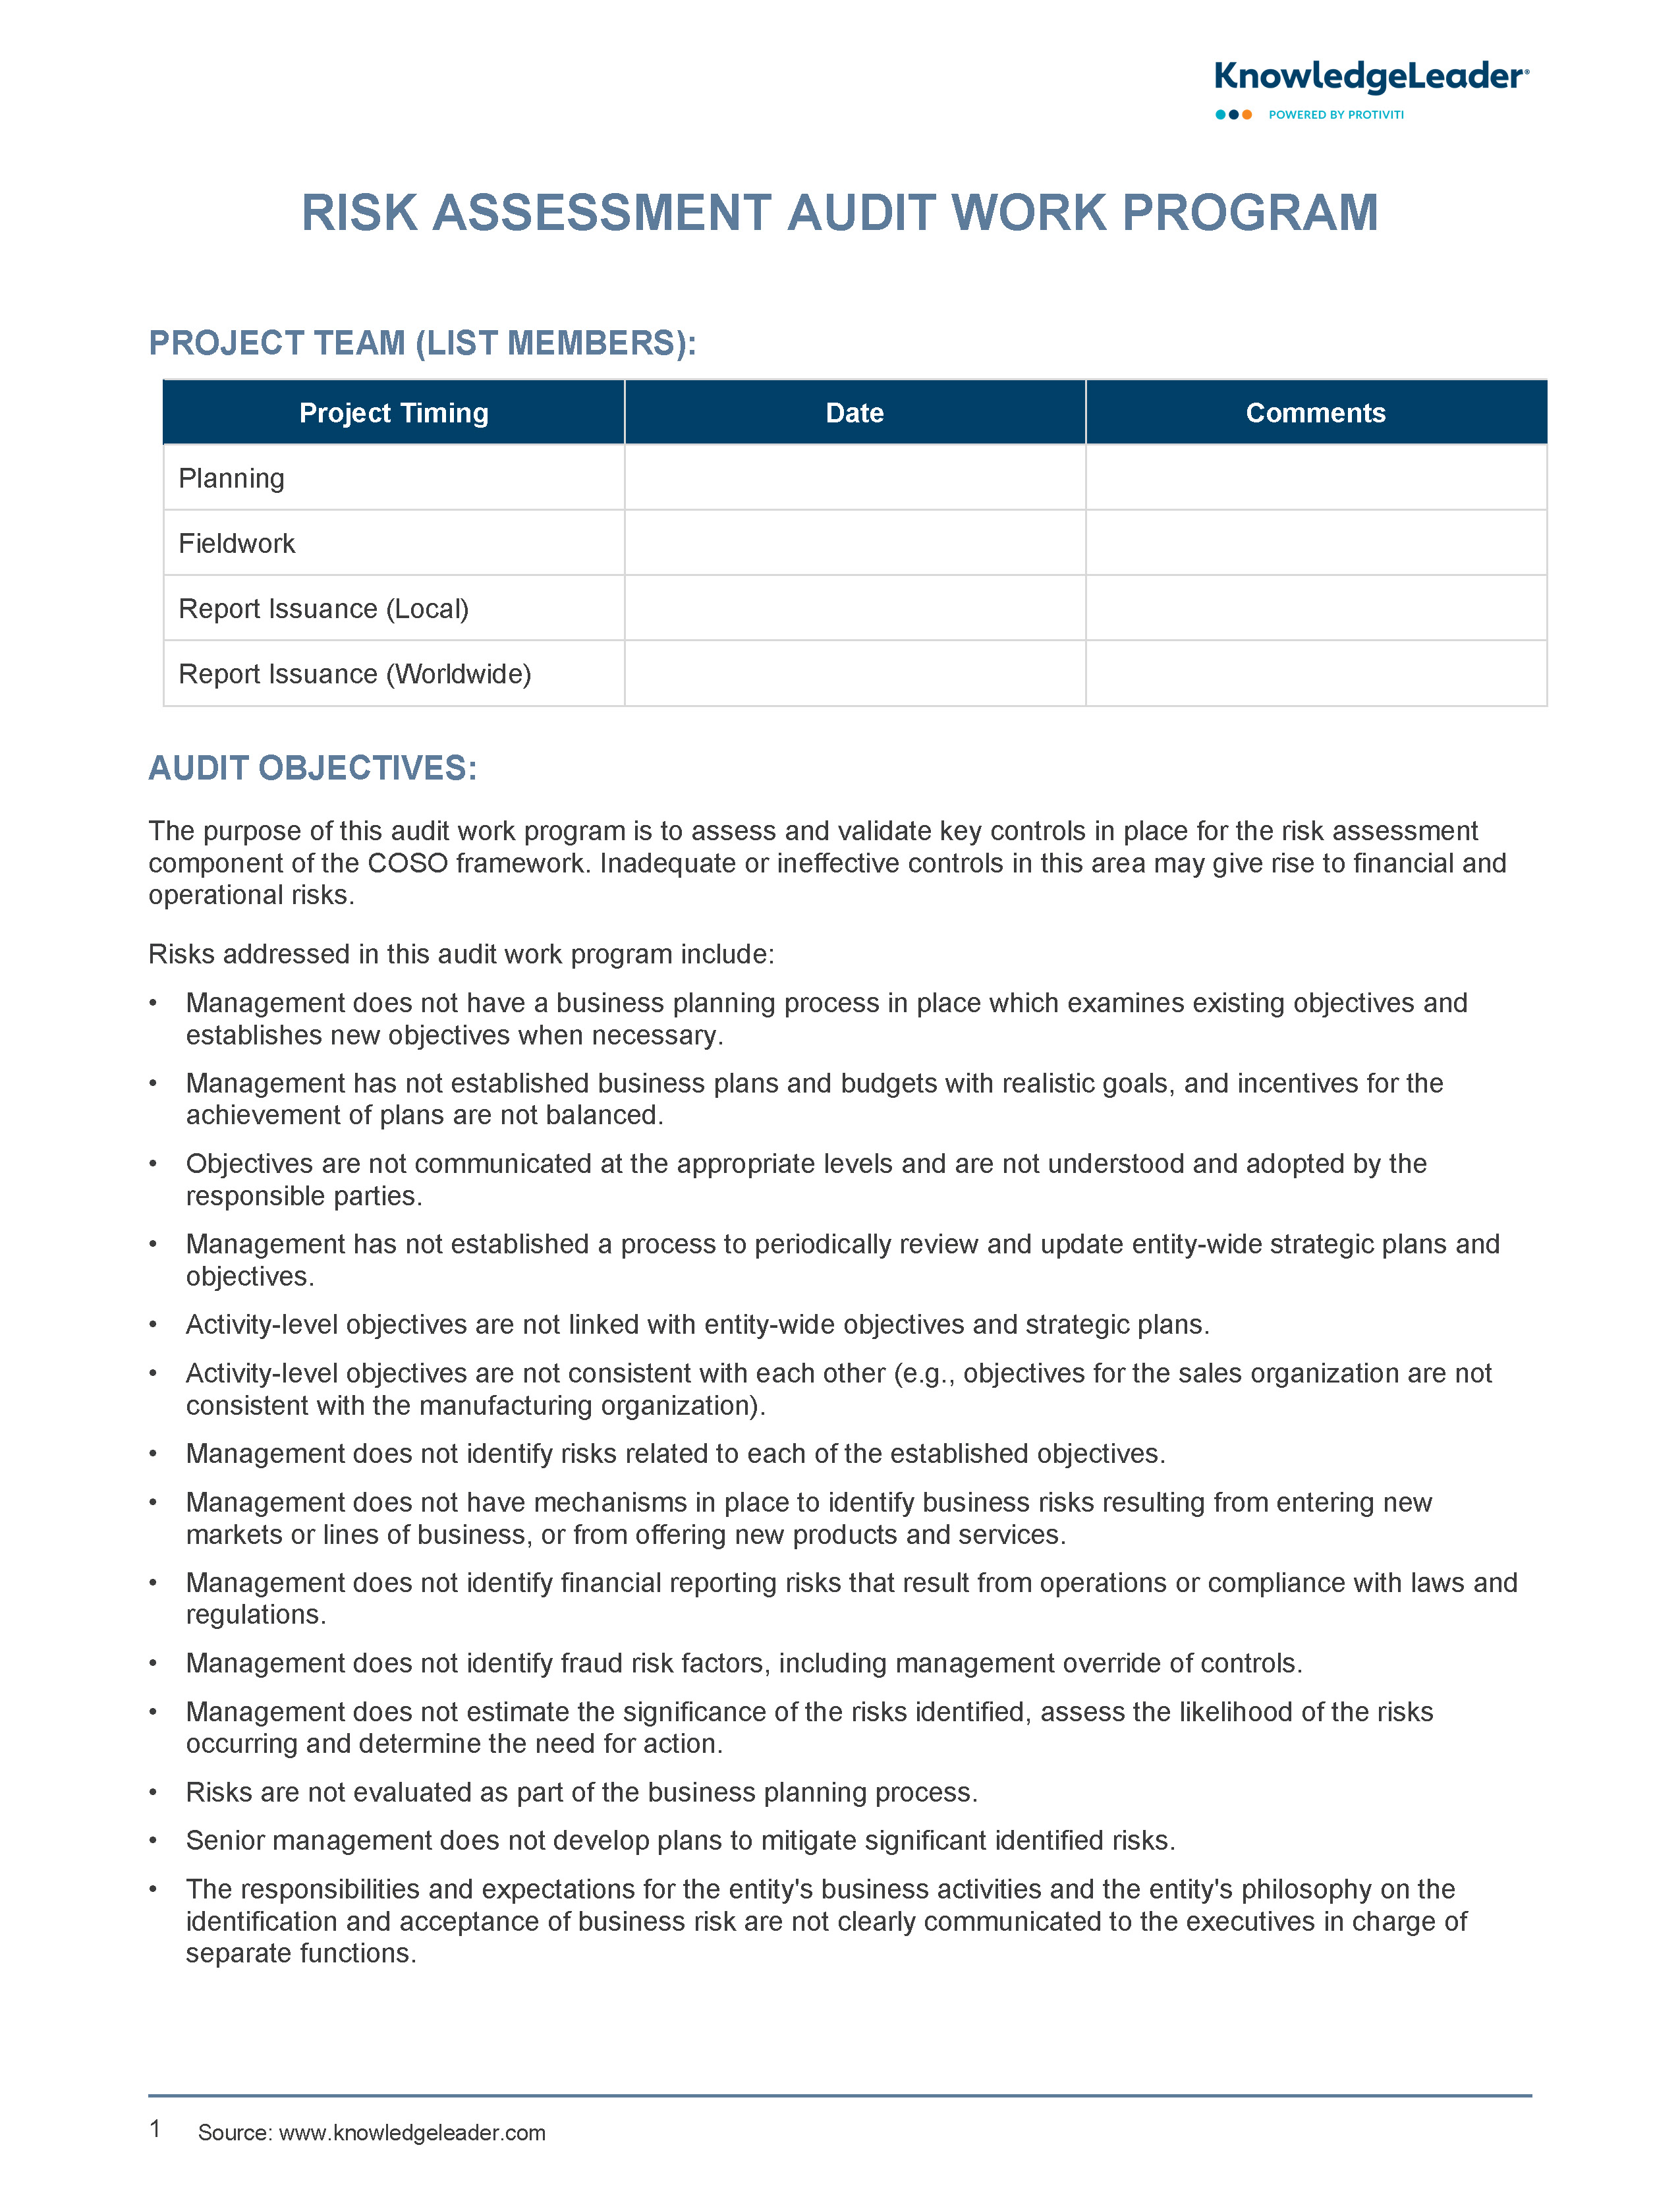 Screenshot of the first page of Risk Assessment Audit Work Program